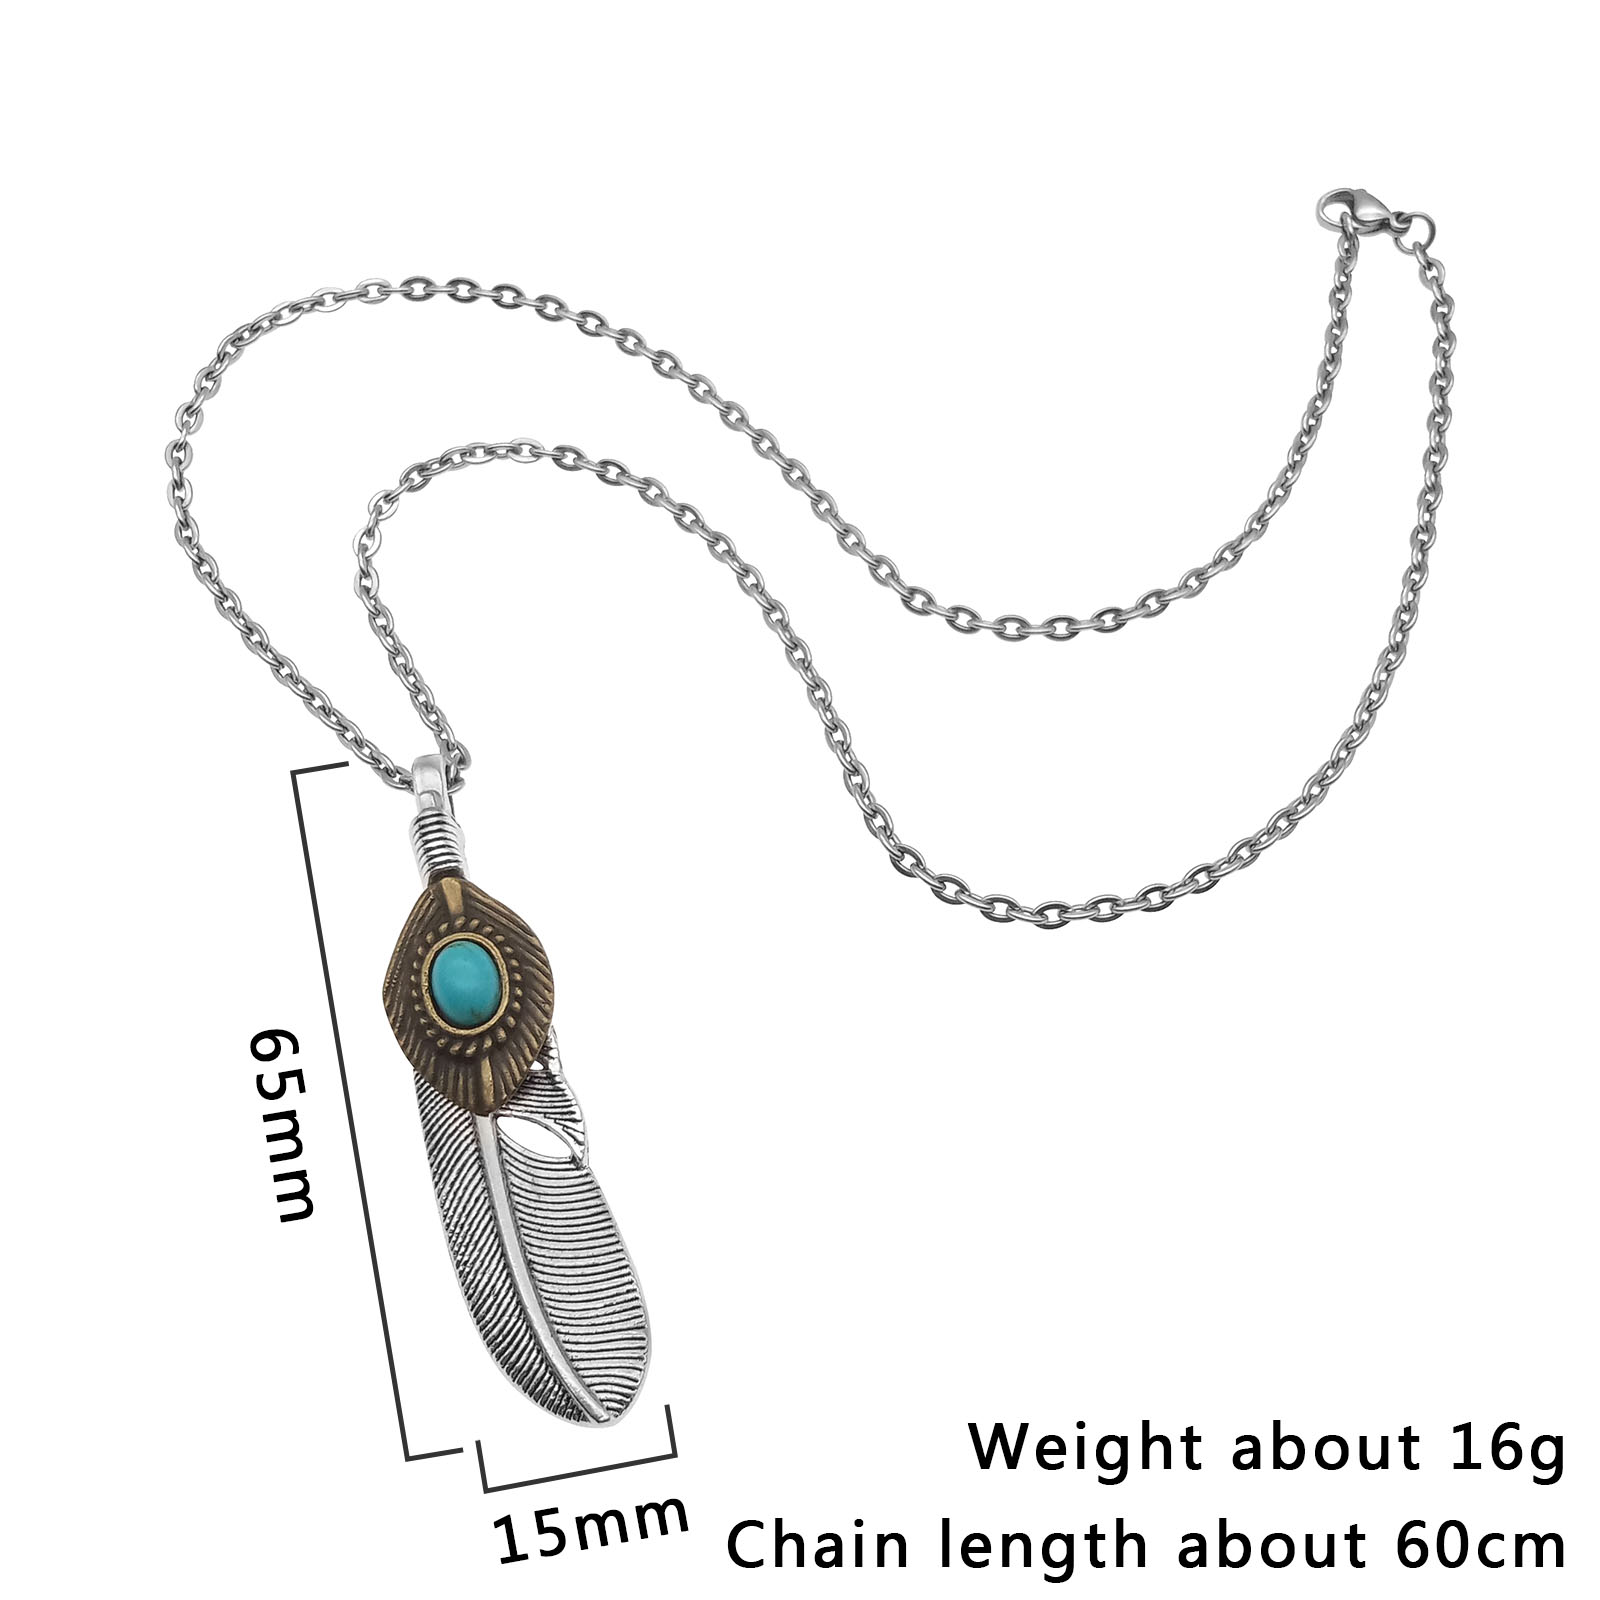 1:The pendant is about 15mm long, about 65mm high, and the chain is about 60cm long